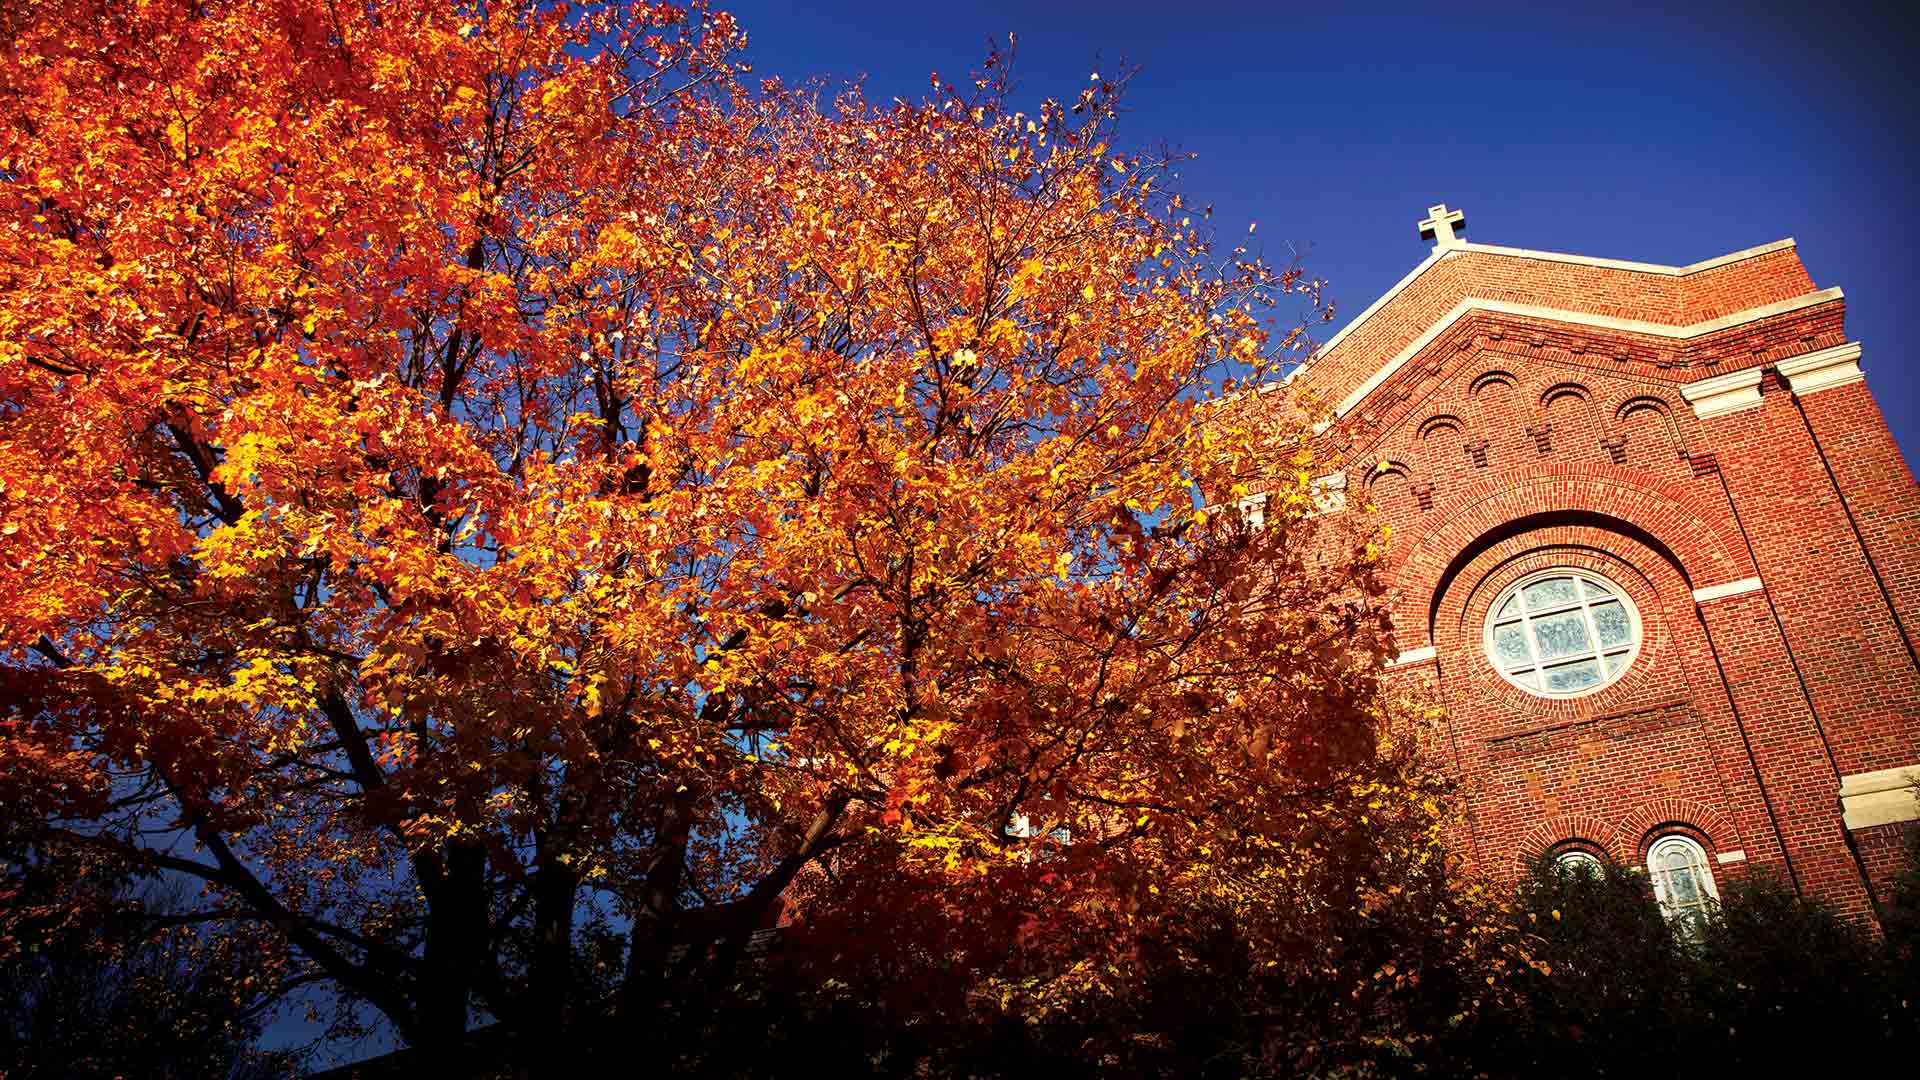 St. Thomas chapel in the fall